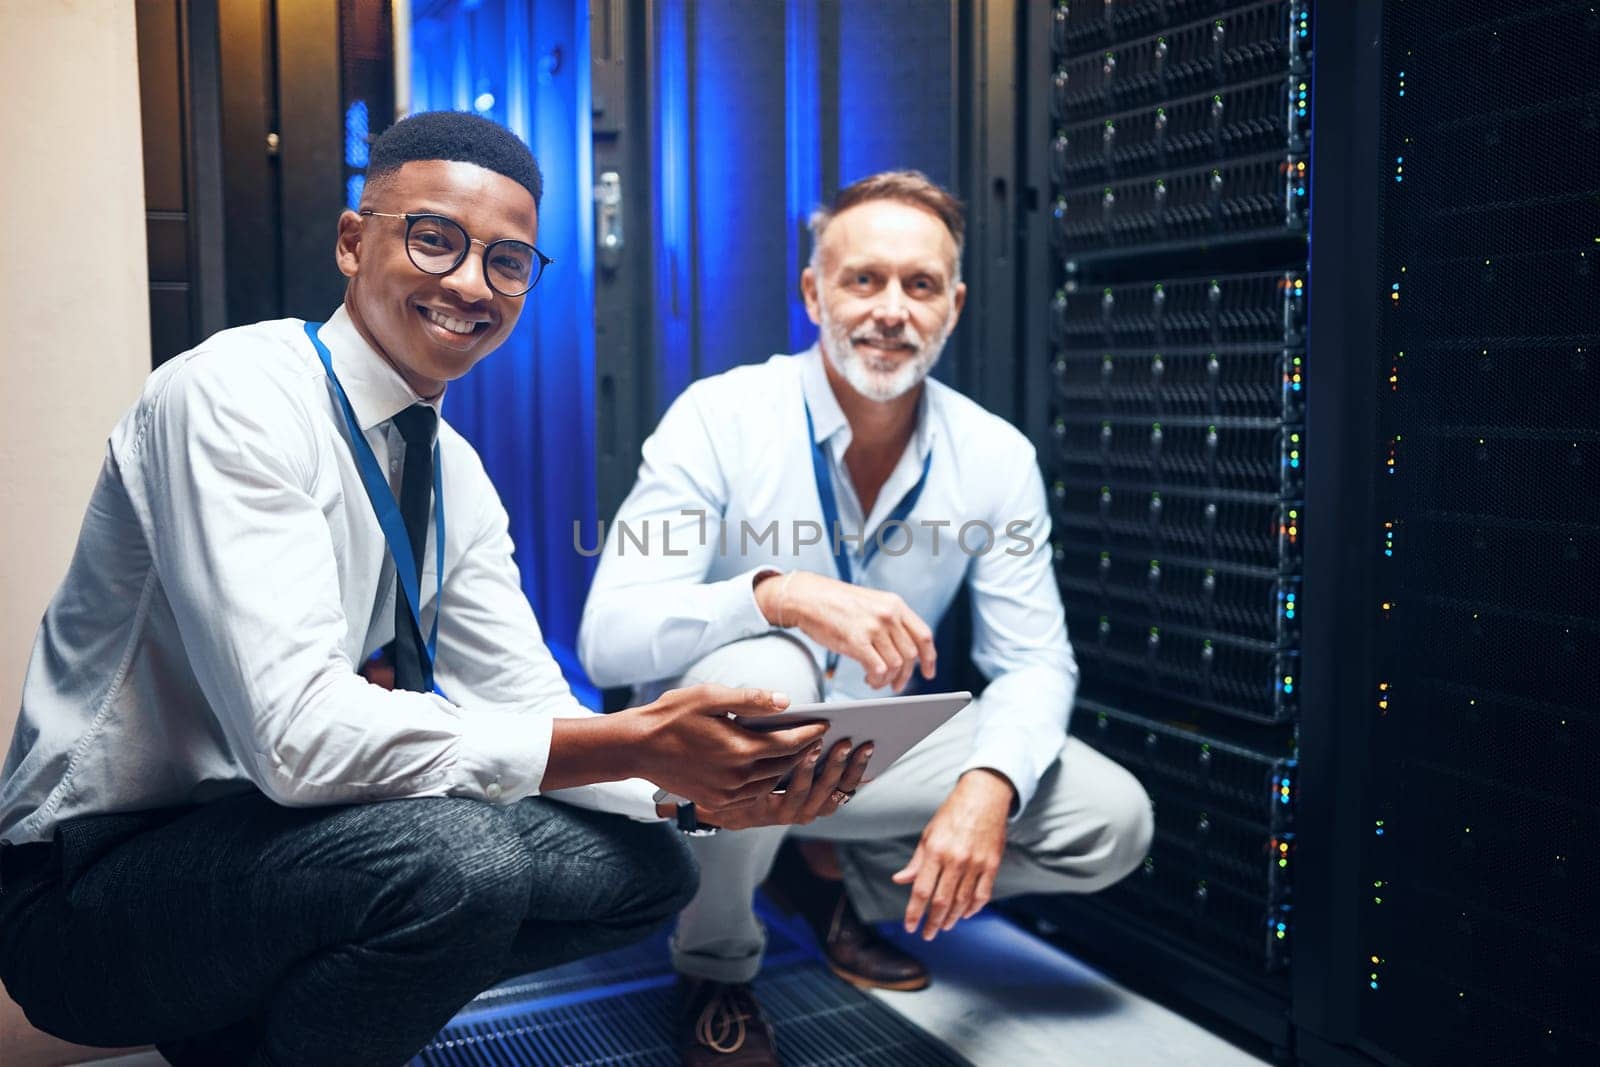 The tech gurus are on the case. Portrait of two technicians using a digital tablet while working in a server room